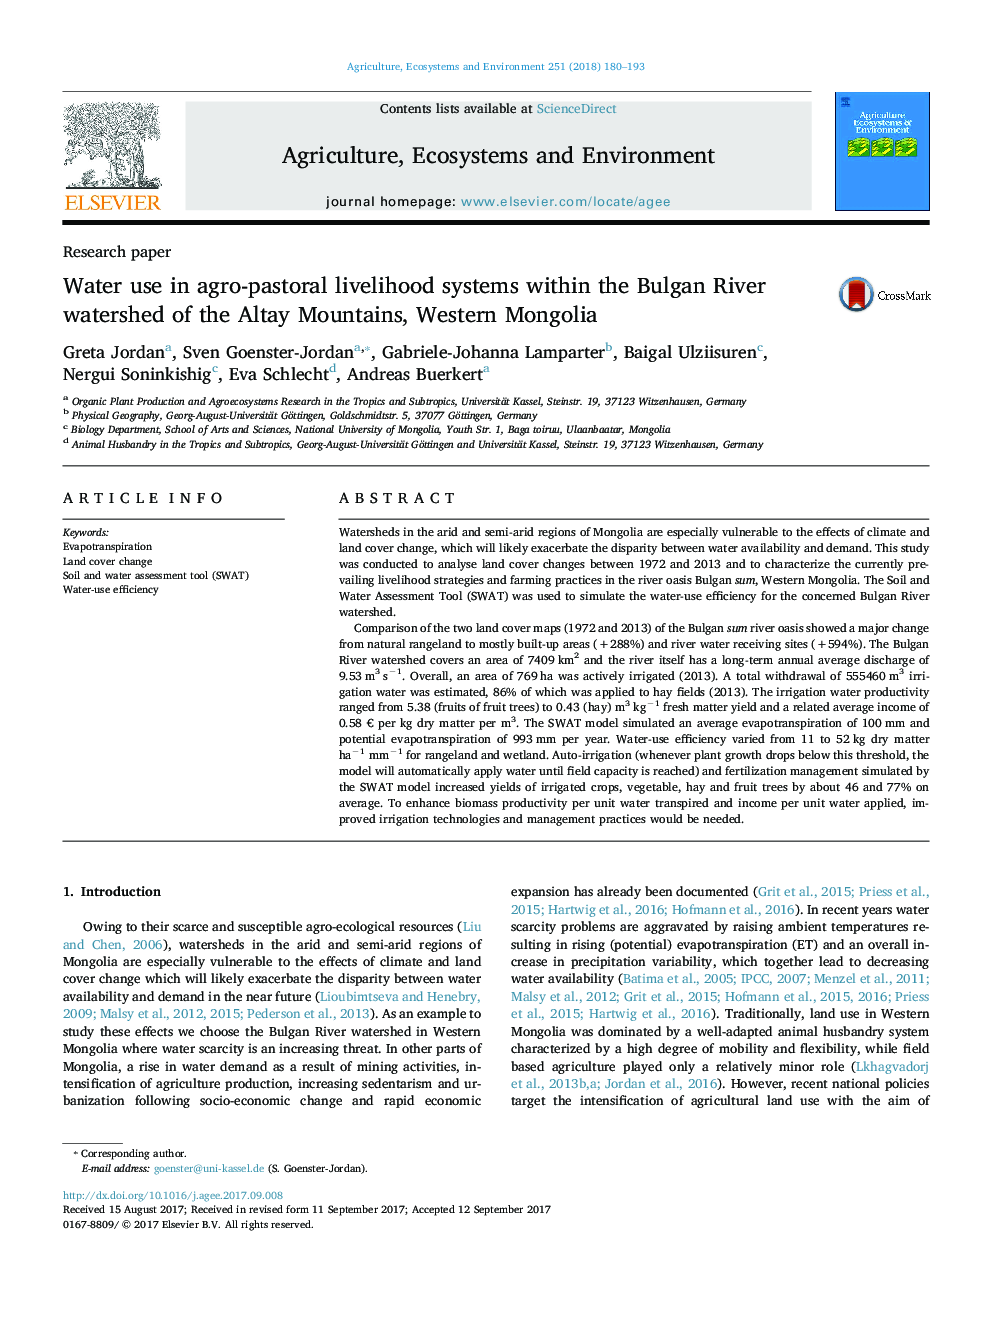 Water use in agro-pastoral livelihood systems within the Bulgan River watershed of the Altay Mountains, Western Mongolia